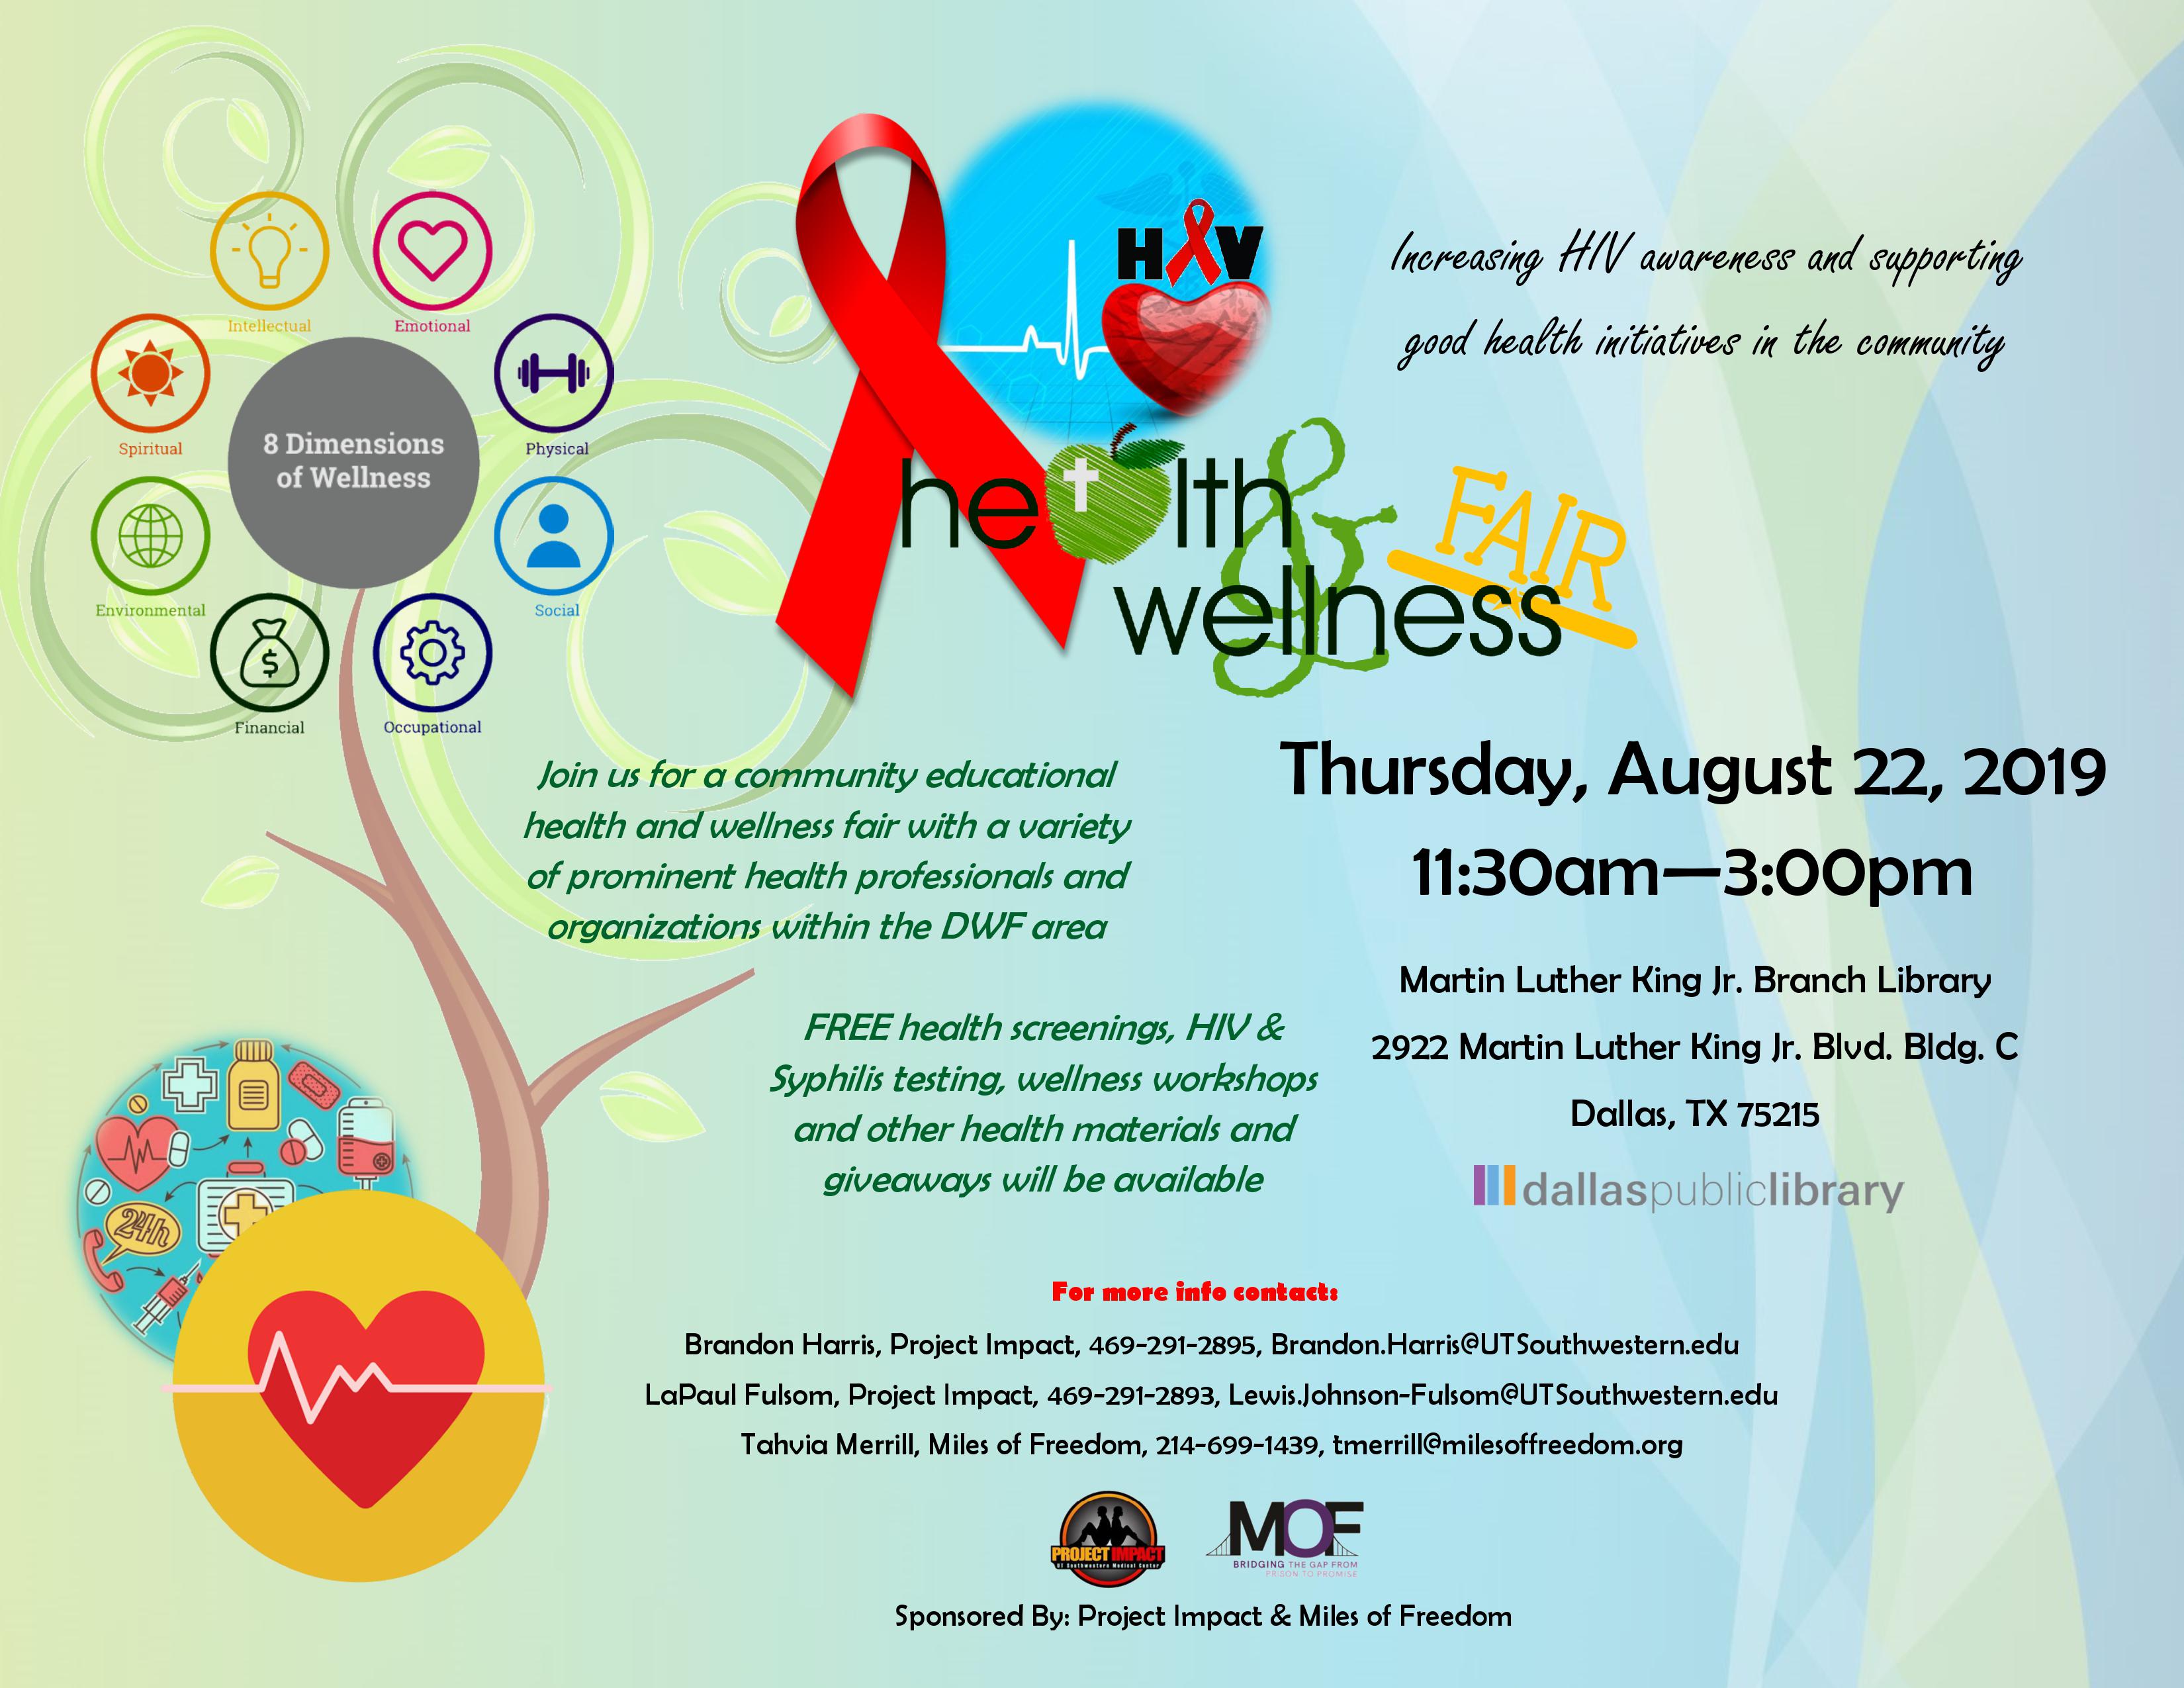 Join us for a community educational health and wellness fair with a variety of prominent health professionals and organizations within the DWF area.